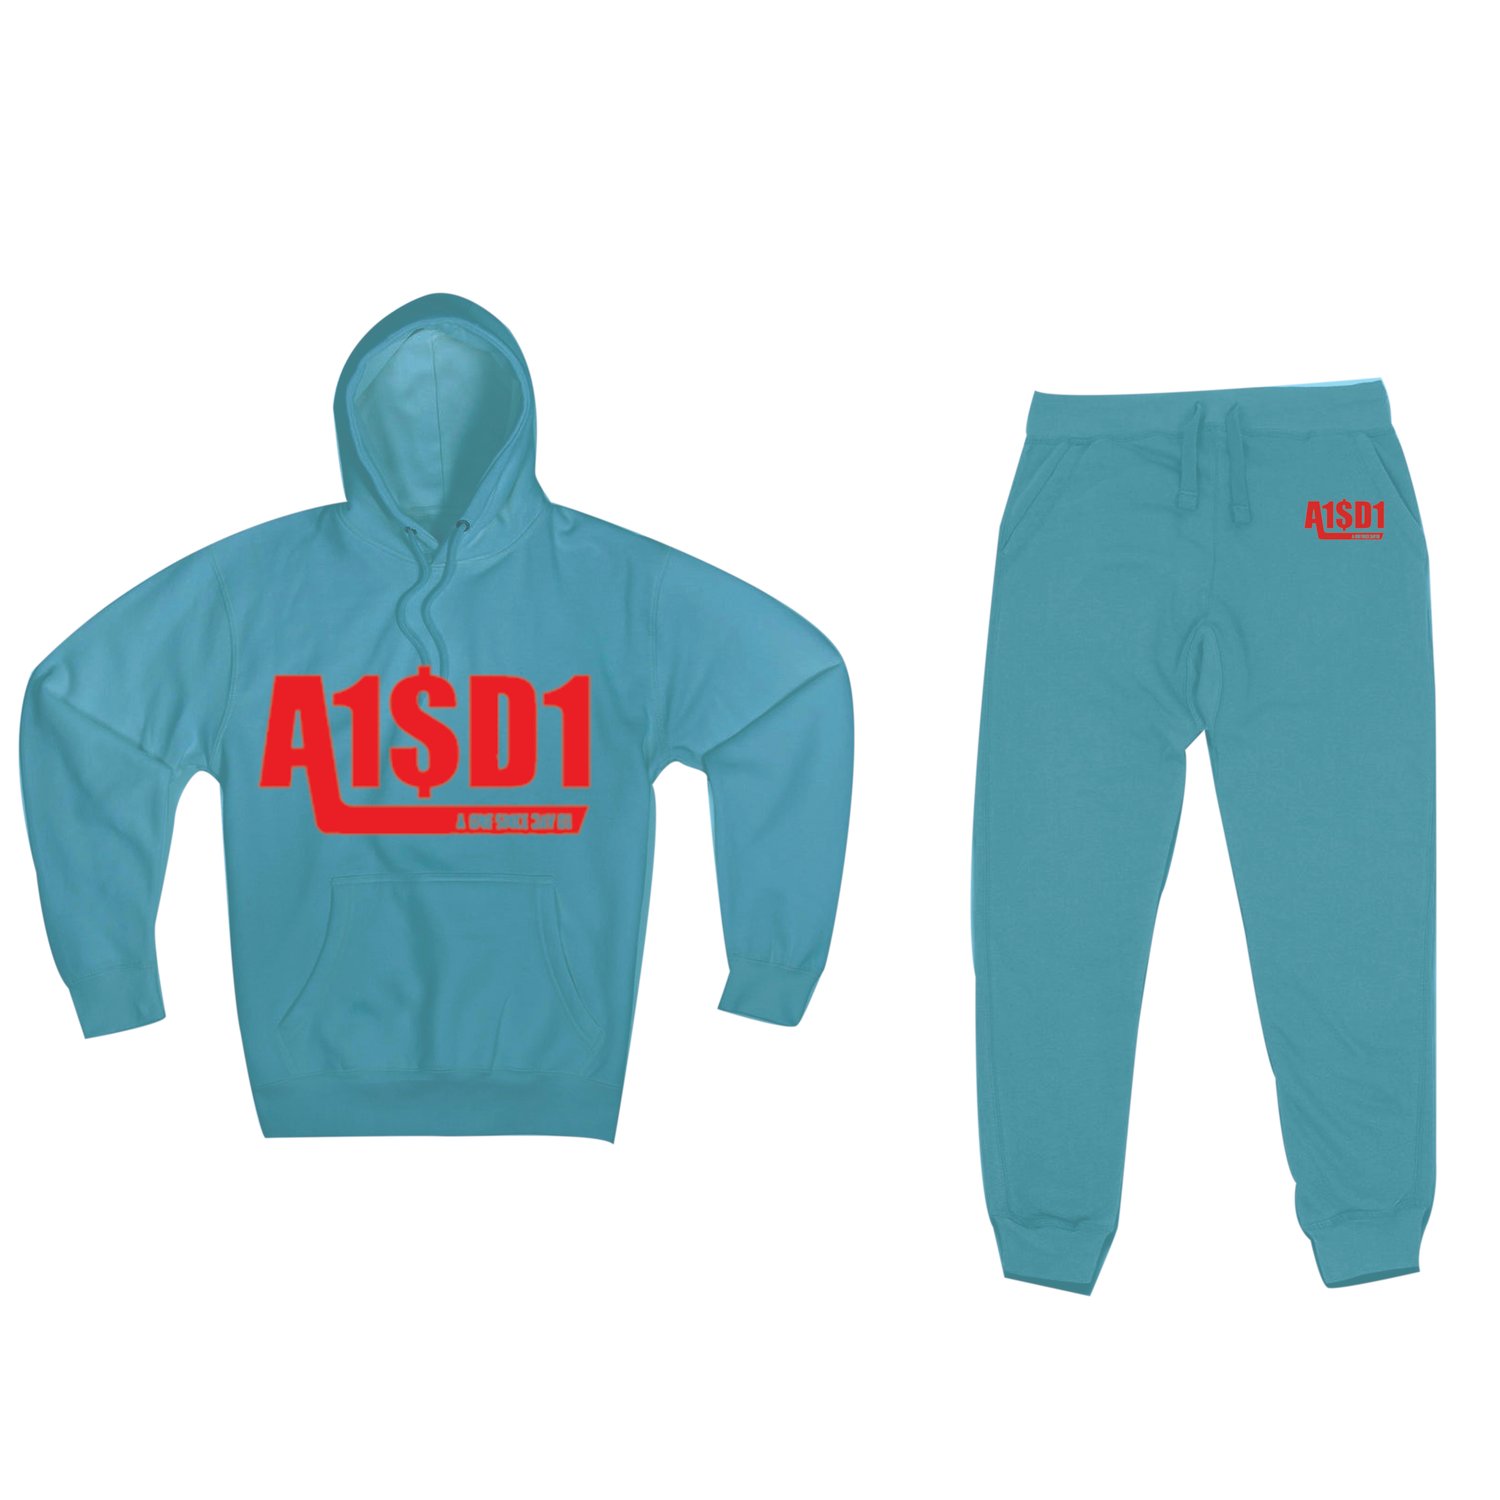 Image of A1$D1 JOGGERS ONLY (TEAL X RED) 